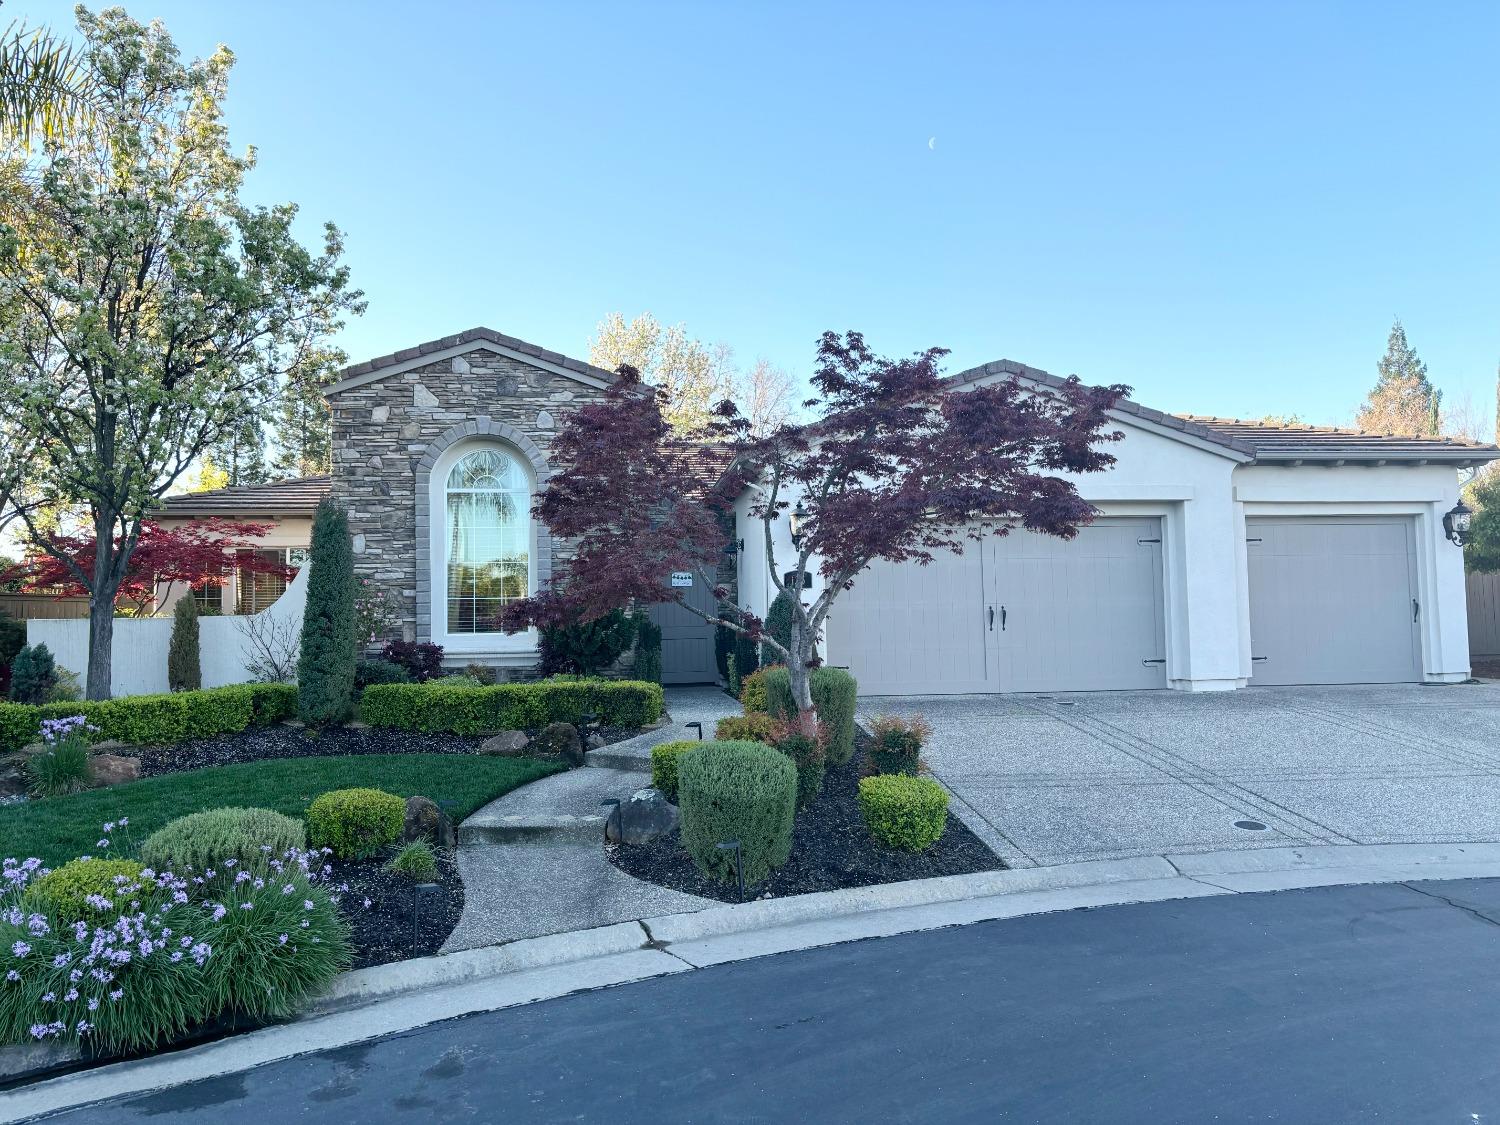 Photo of 125 Crane Meadow Ct in Roseville, CA